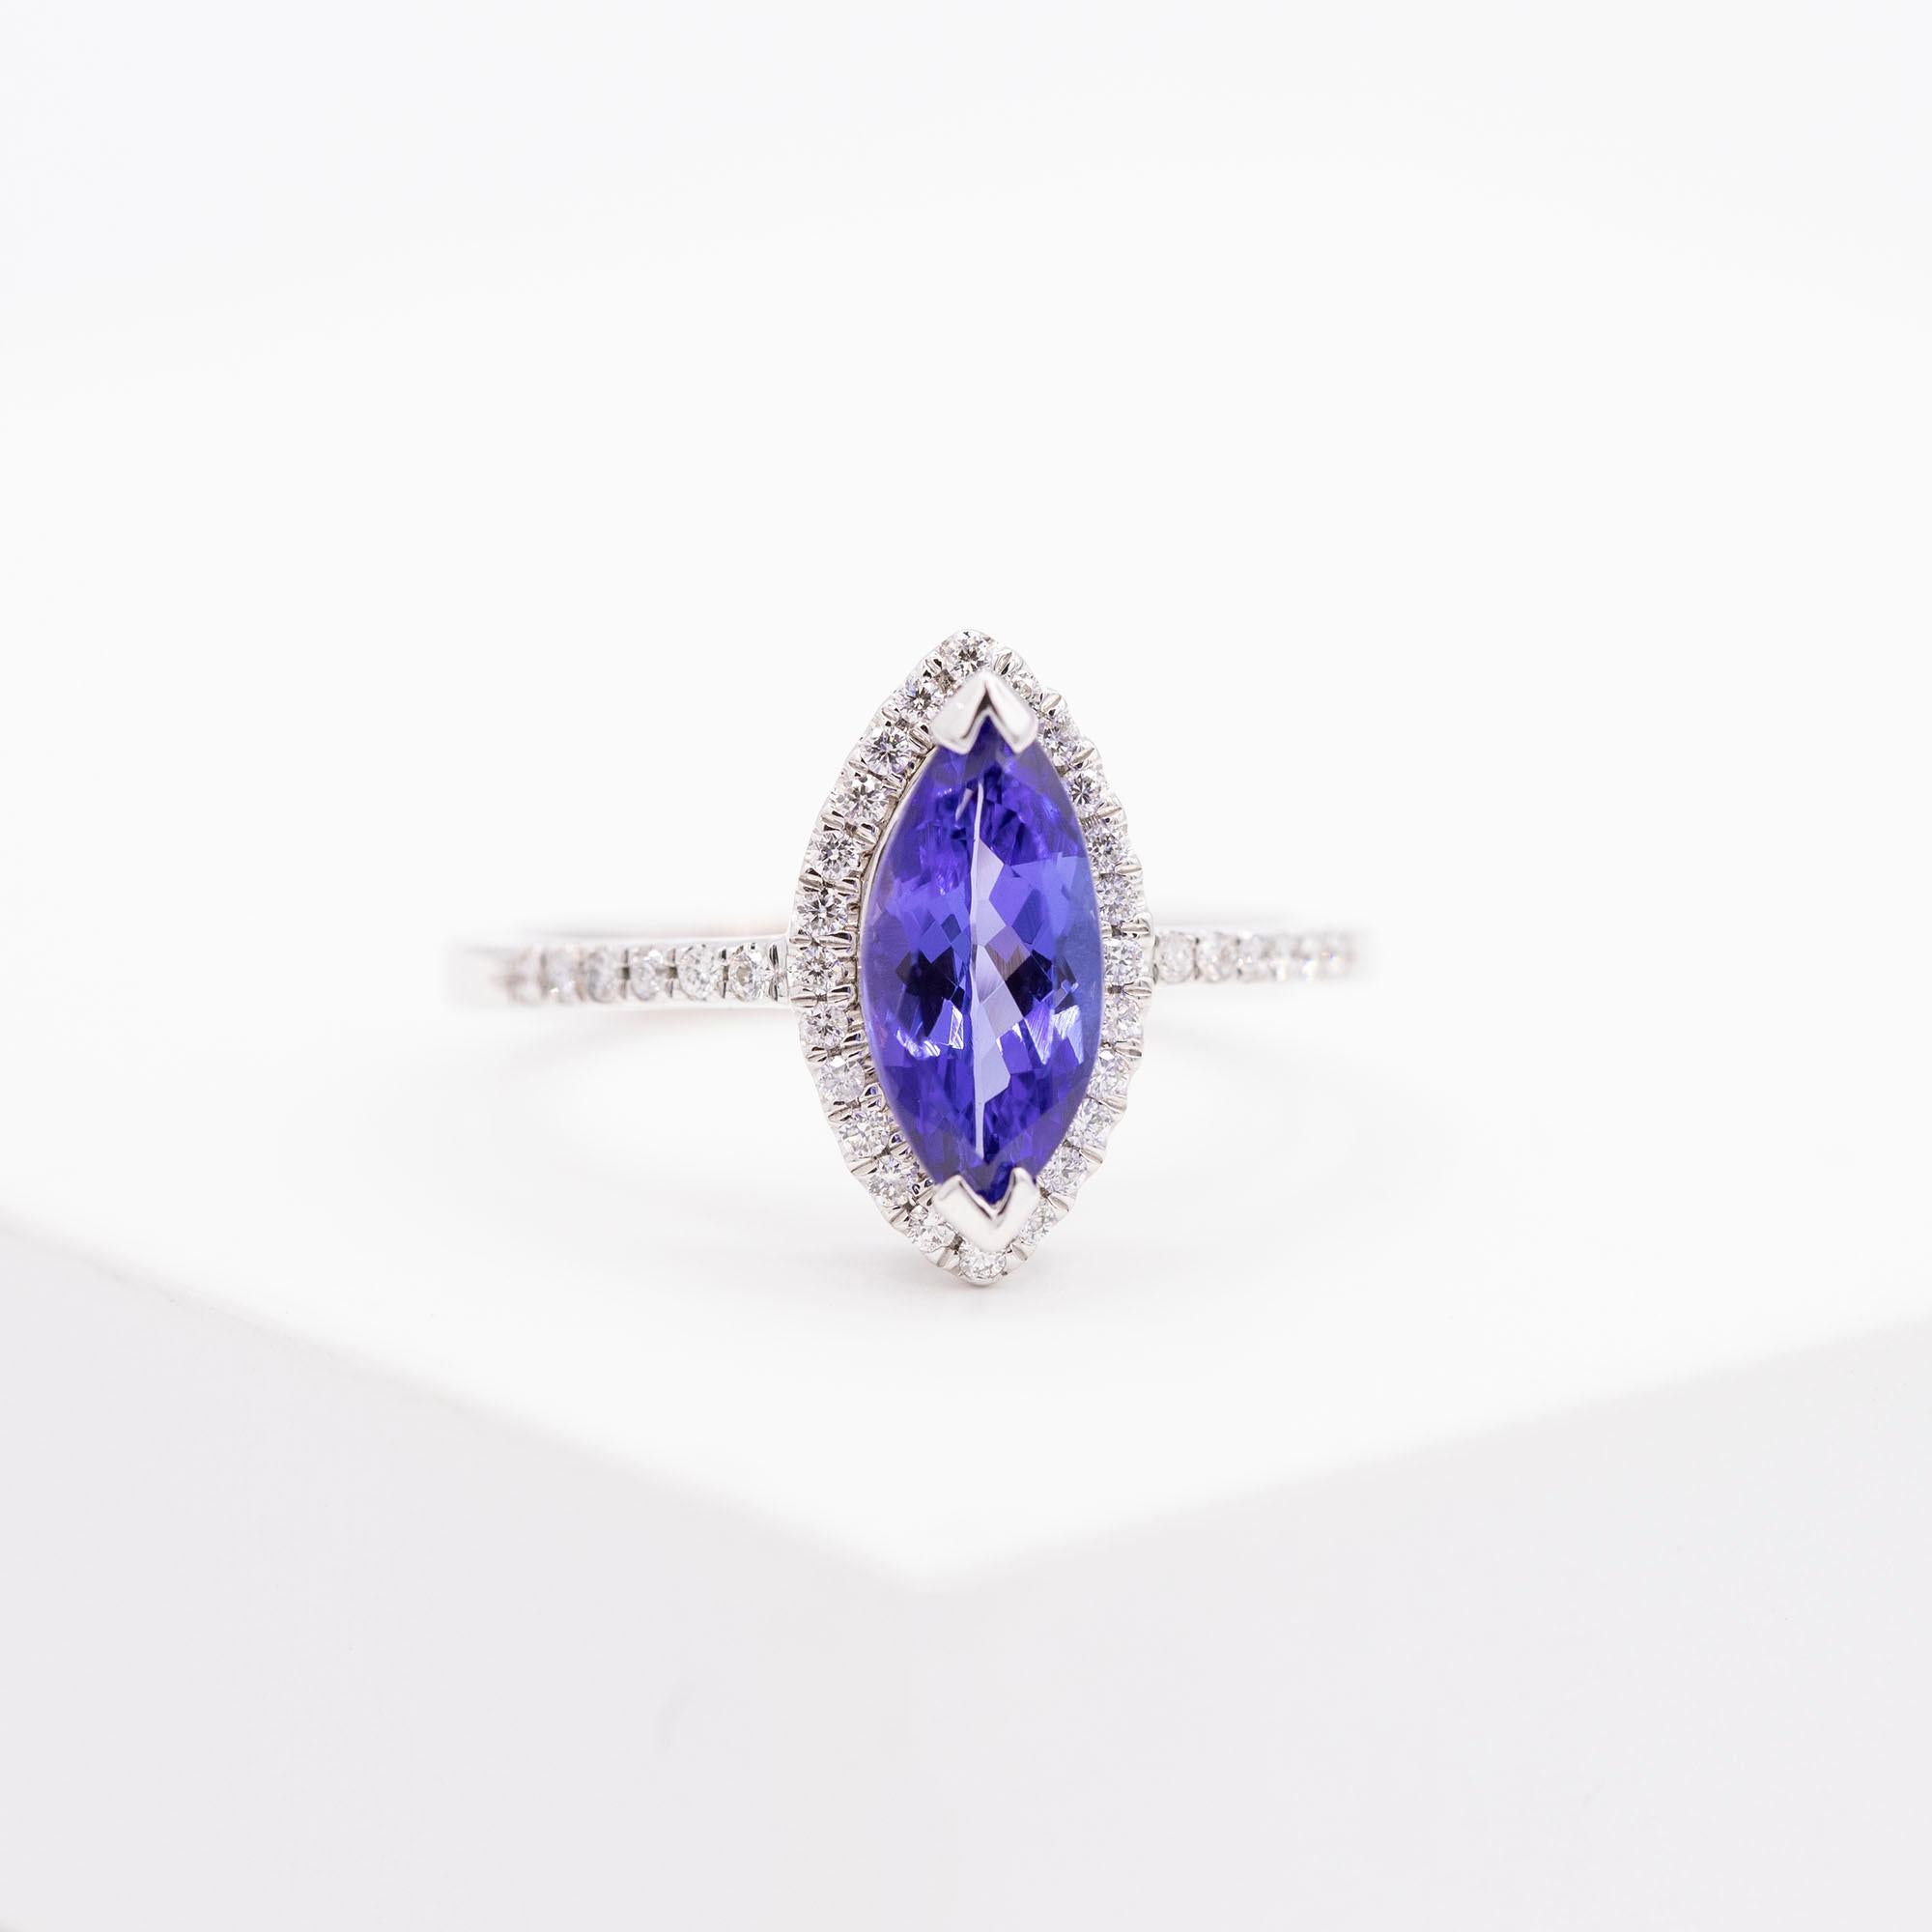 18kt White Gold Tanzanite & Diamond Ring. The marquise cut tanzanite weighs 1.20 approximately. The halo has 24 round diamonds and 12 round diamonds in  the shank. The diamonds have a total carat weight of .27 carats. The ring is a size 6 1/4.